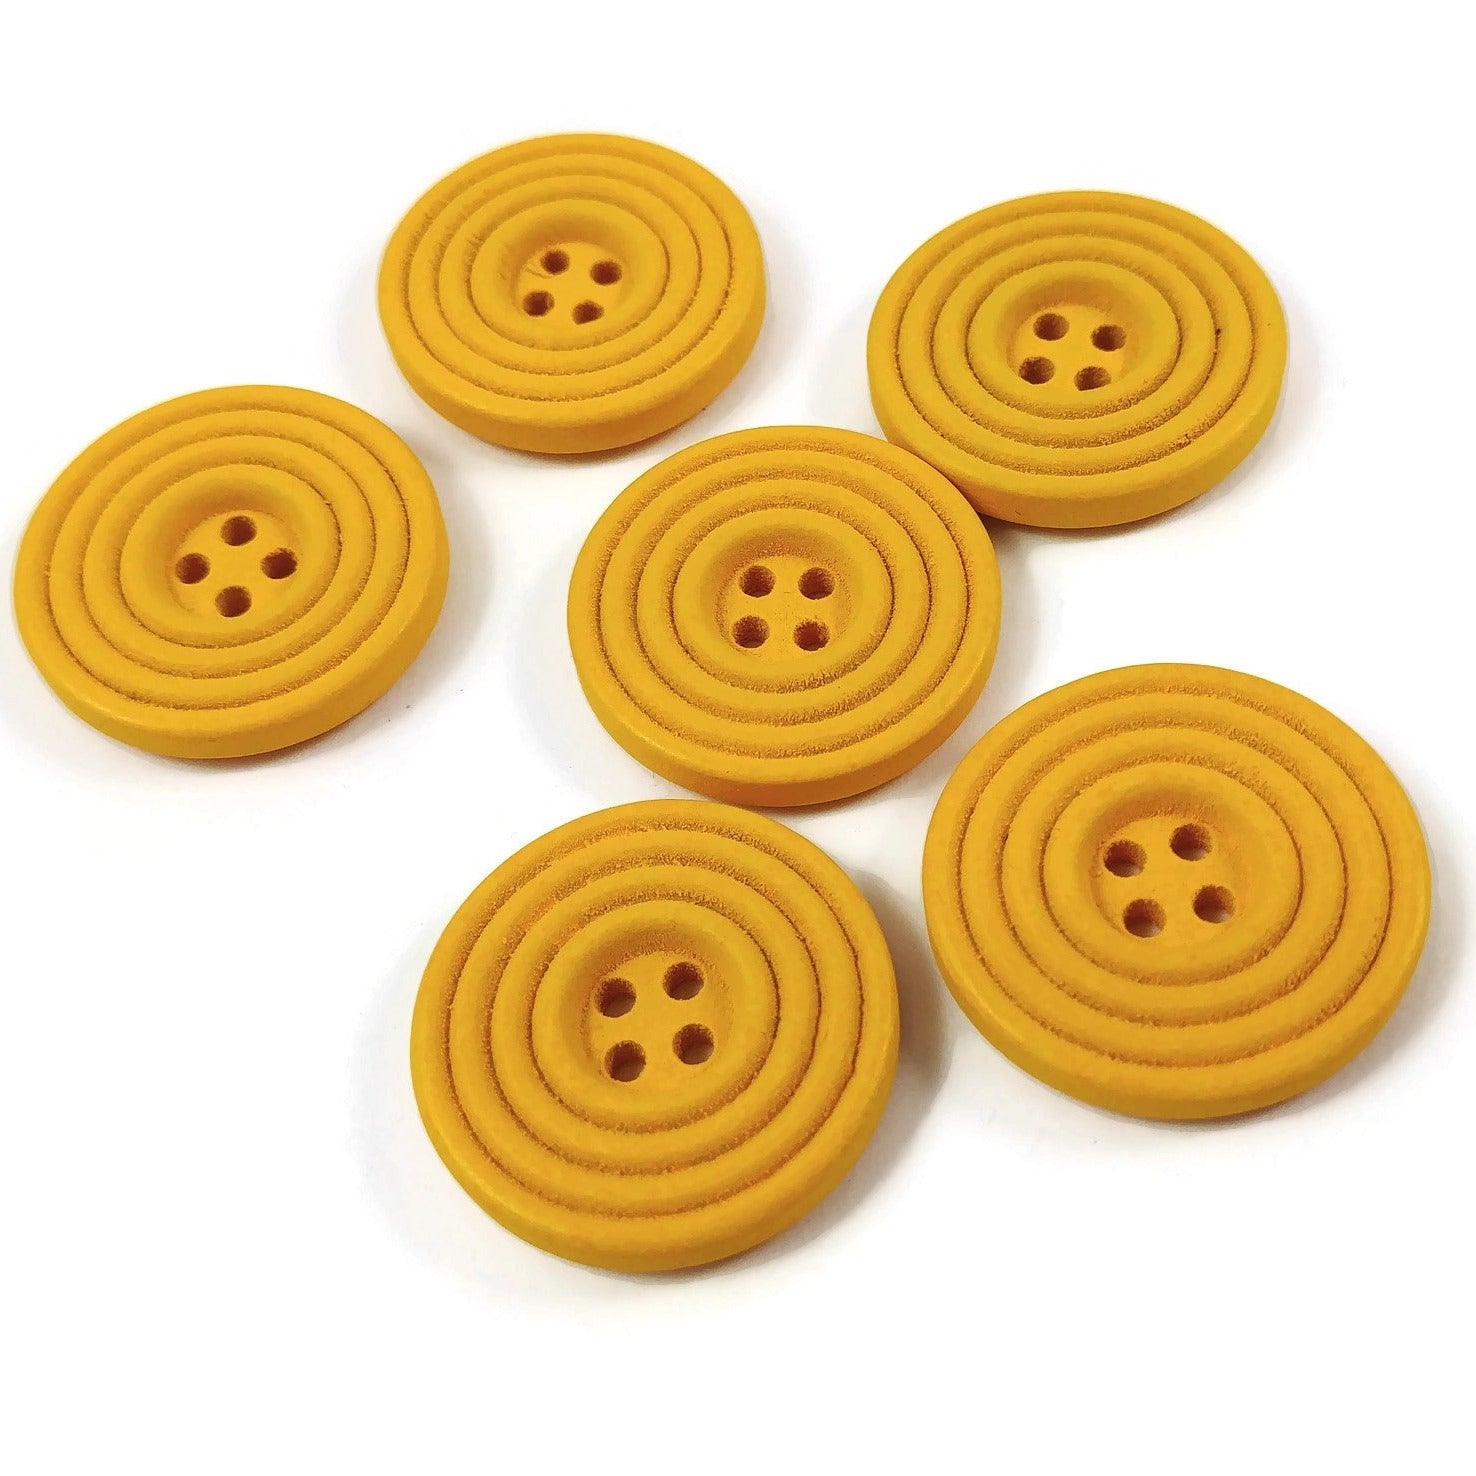 1 inch wooden sewing buttons 25mm - Set of 6 circle wood button - Choose your color